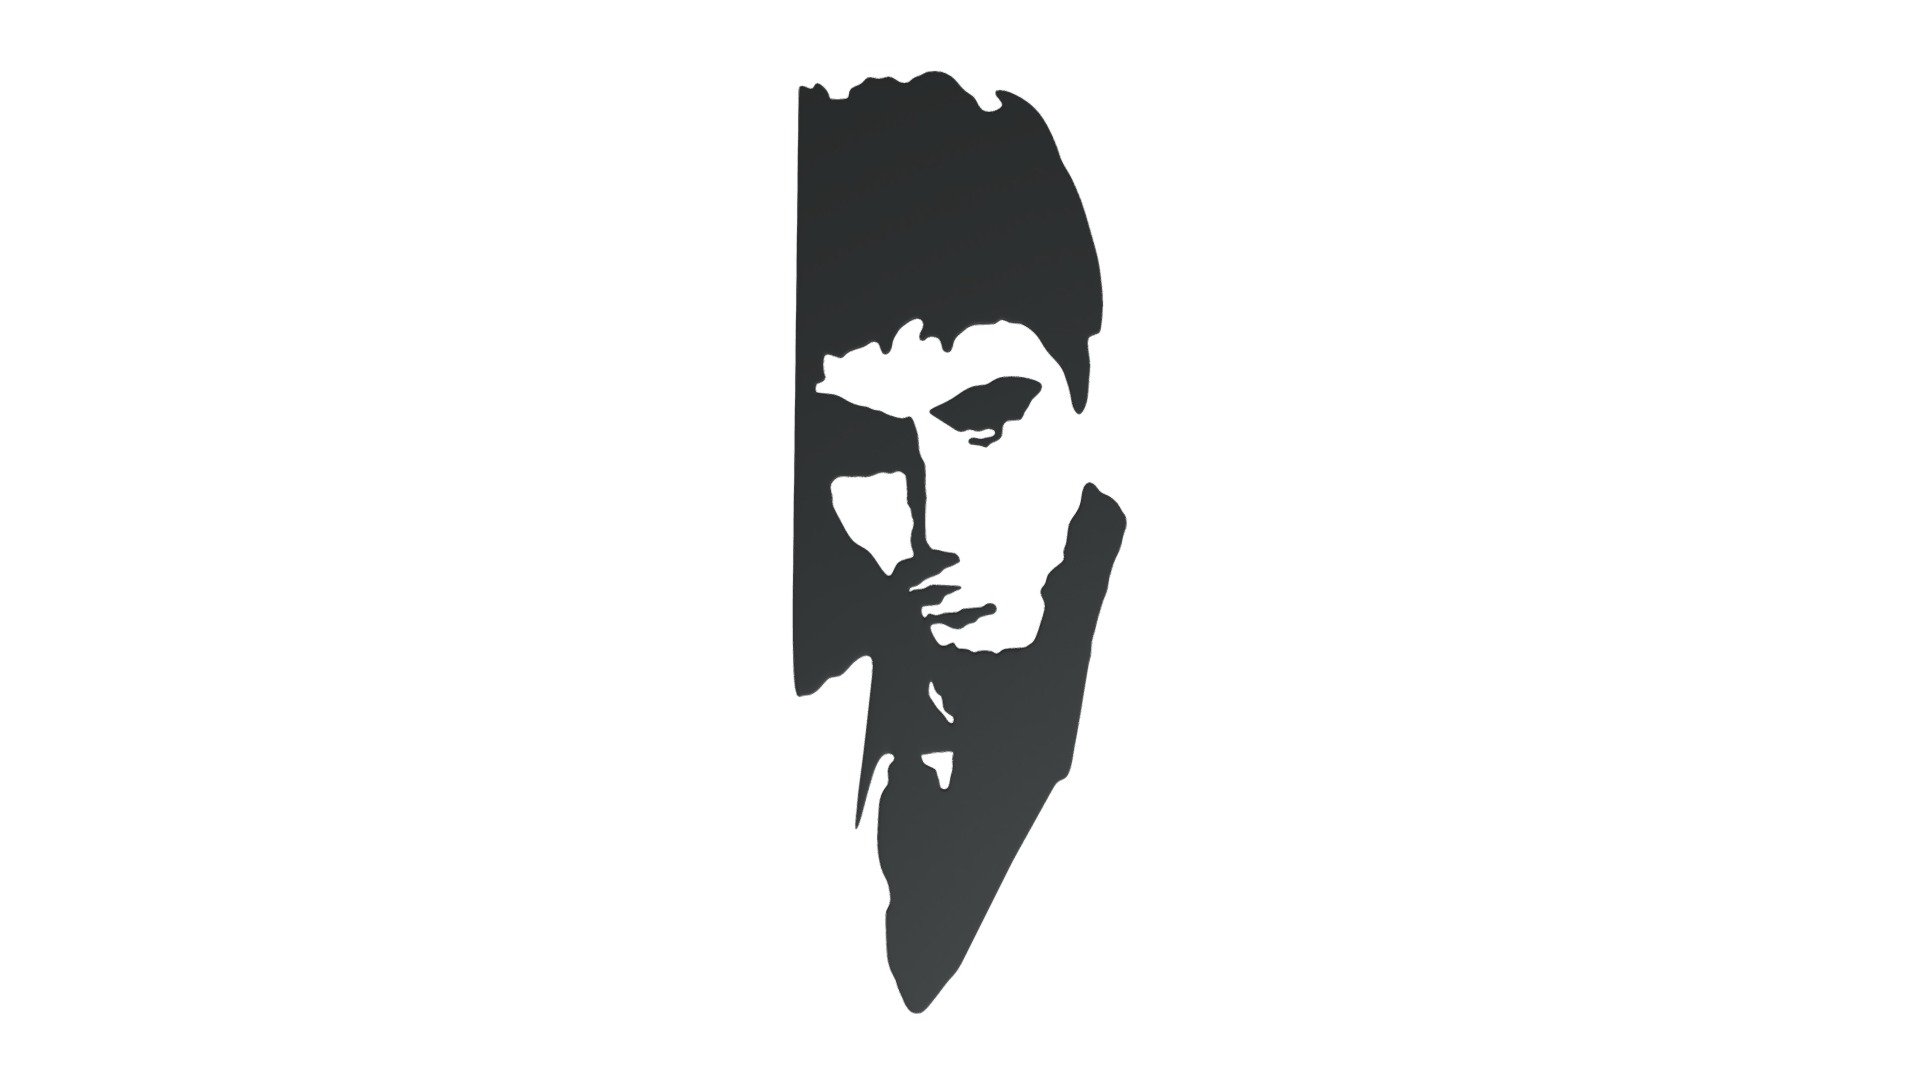 This model contains an Scarface Poster based on a reference from the scarface film which i modeled in Maya 2018. This model is perfect to create a new great scene with different wall silhouettes.

The model is ready as one unique part and ready for being a great CGI model and also a 3D printable model.

If you need any kind of help contact me, i will help you with everything i can. If you like the model please give me some feedback, I would appreciate it.

Don’t doubt on contacting me, i would be very happy to help. If you experience any kind of difficulties, be sure to contact me and i will help you. Sincerely Yours, ViperJr3D - Scarface Poster - Buy Royalty Free 3D model by ViperJr3D 3d model